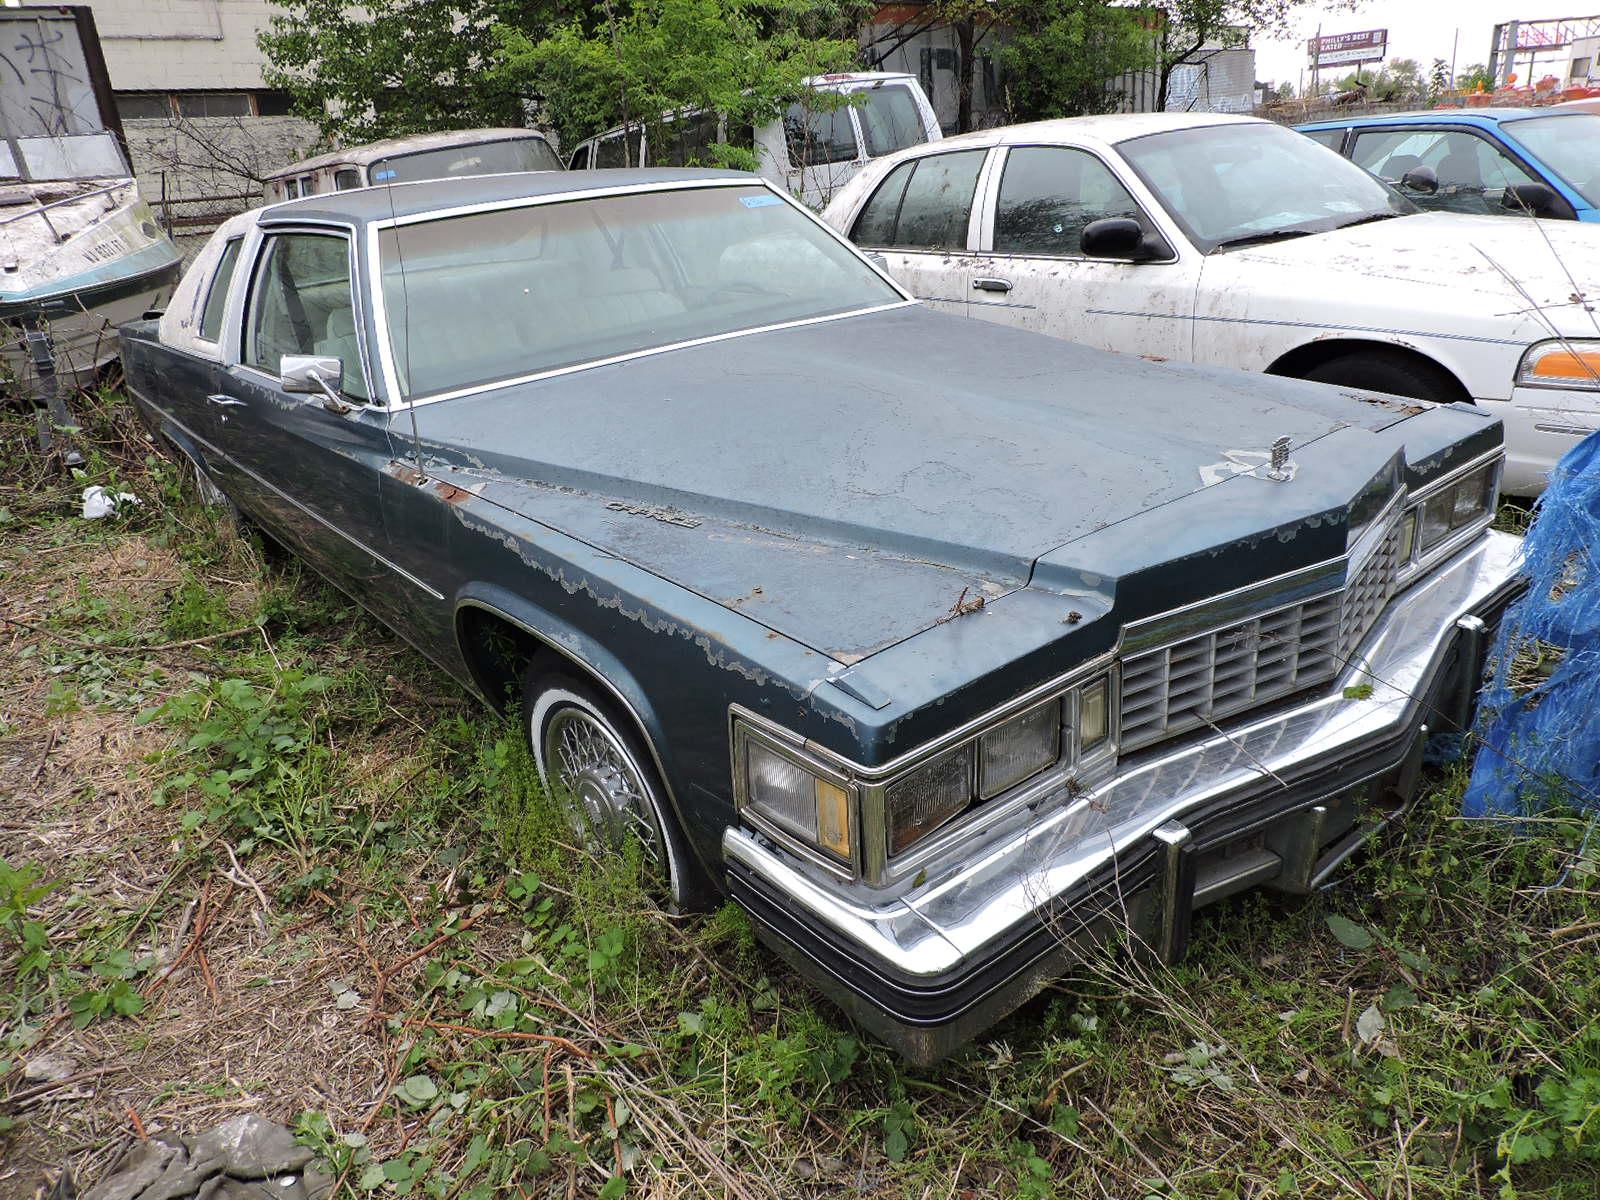 1977 Cadillac Coupe / V8, Auto / Title in Hand